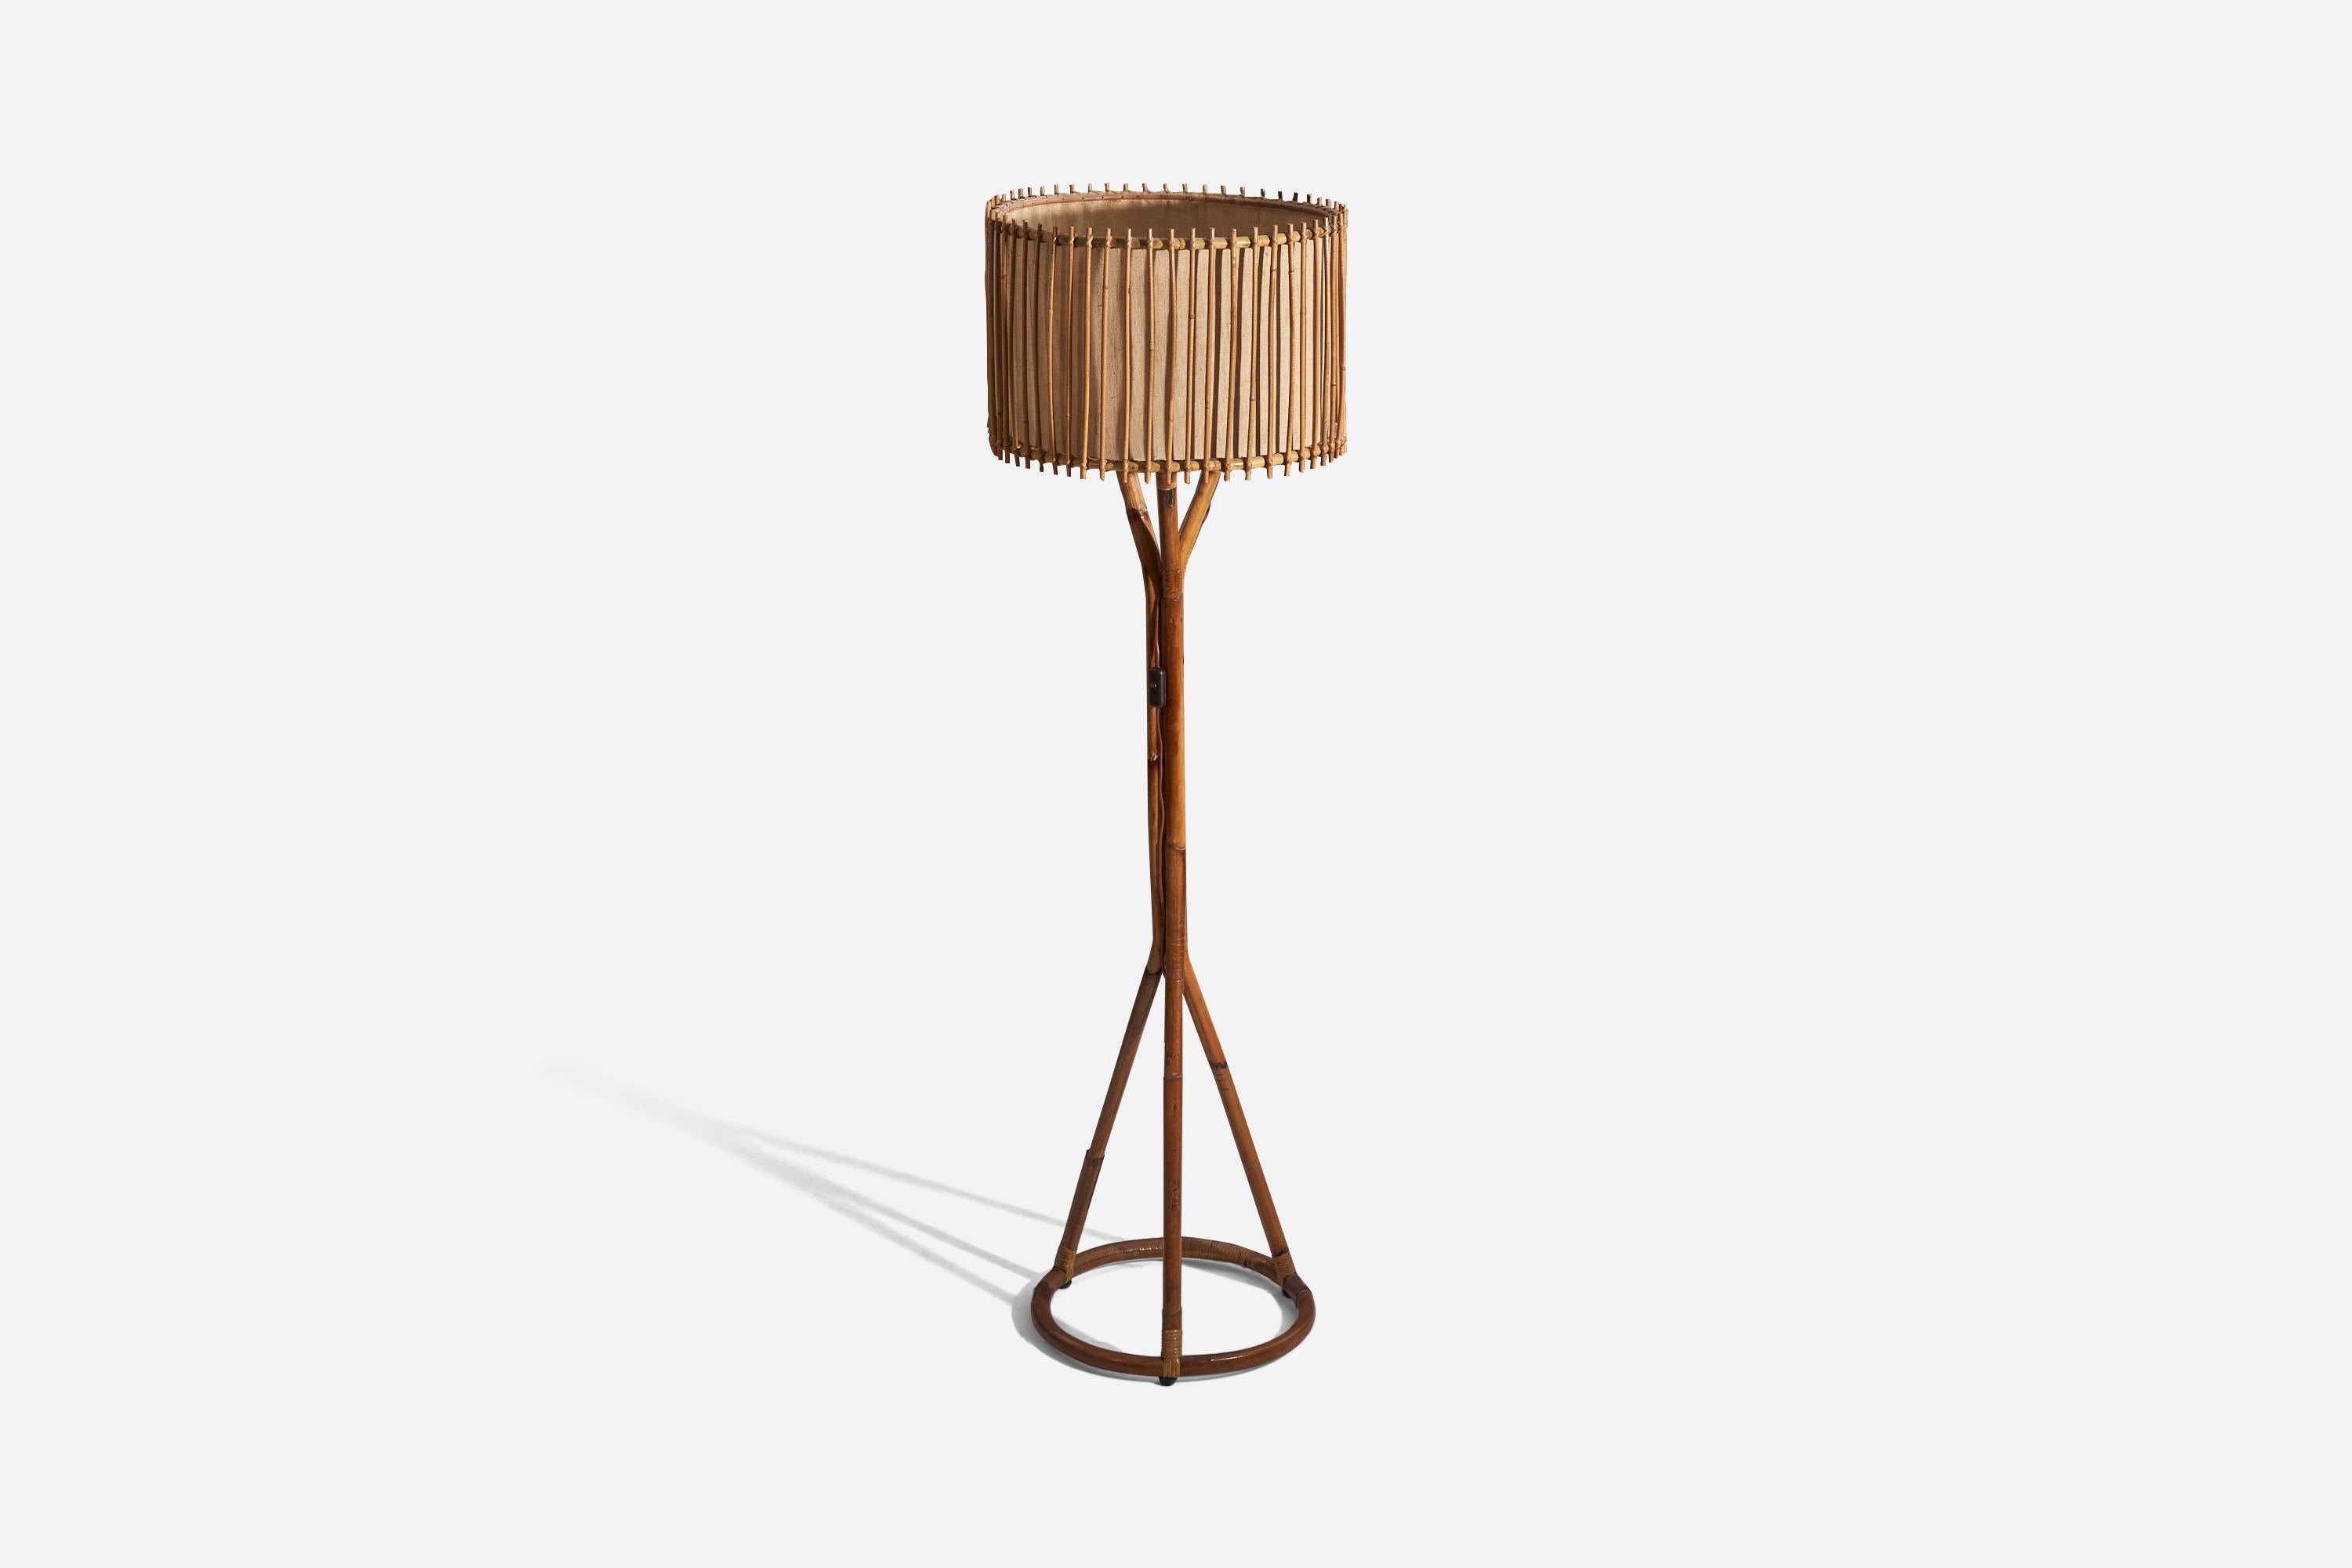 A bamboo, rattan and burlap floor lamp designed and produced by an Italian designer, Italy, 1960s.

